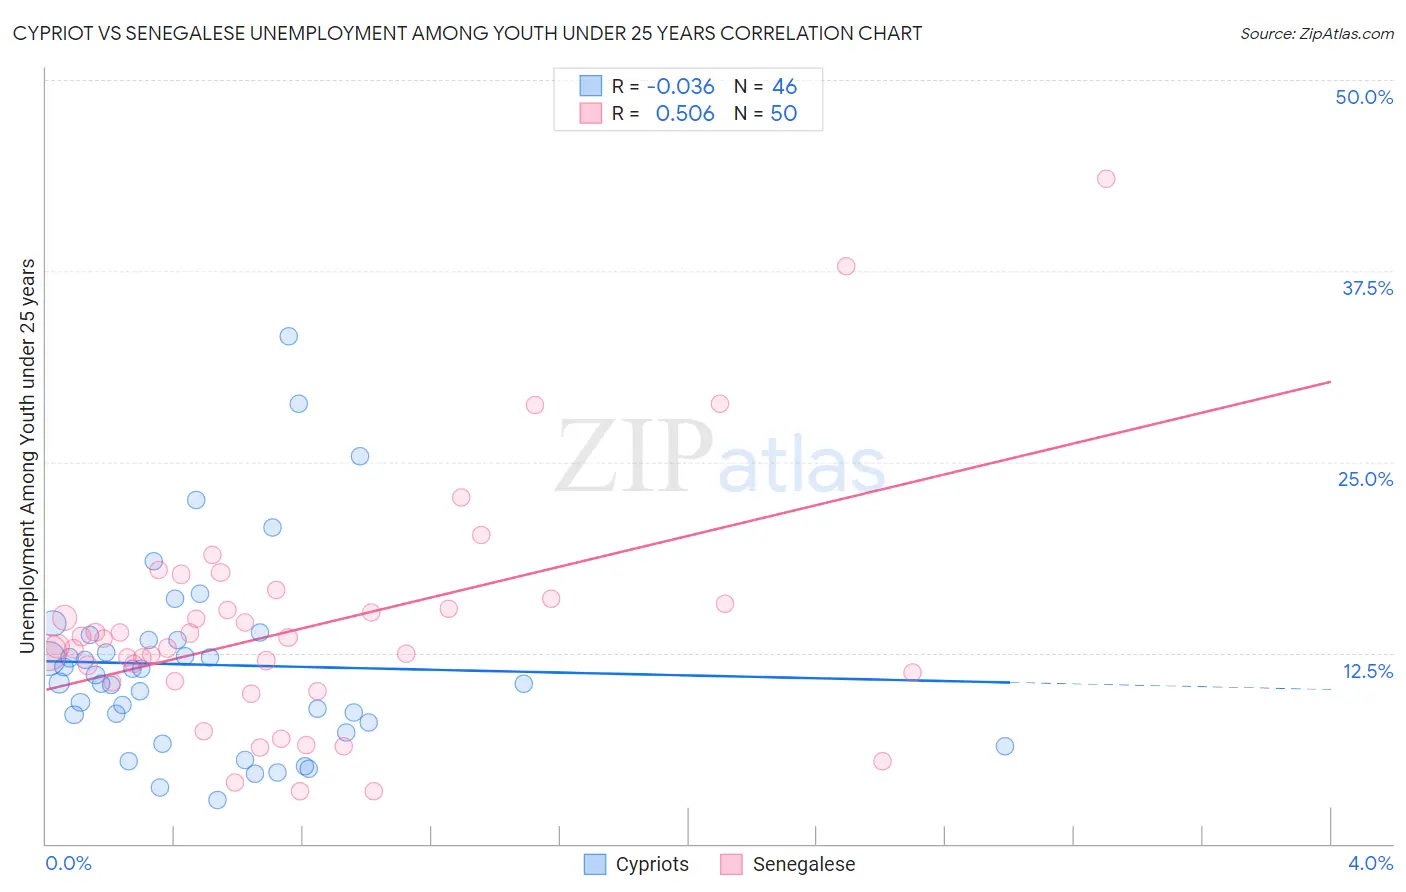 Cypriot vs Senegalese Unemployment Among Youth under 25 years